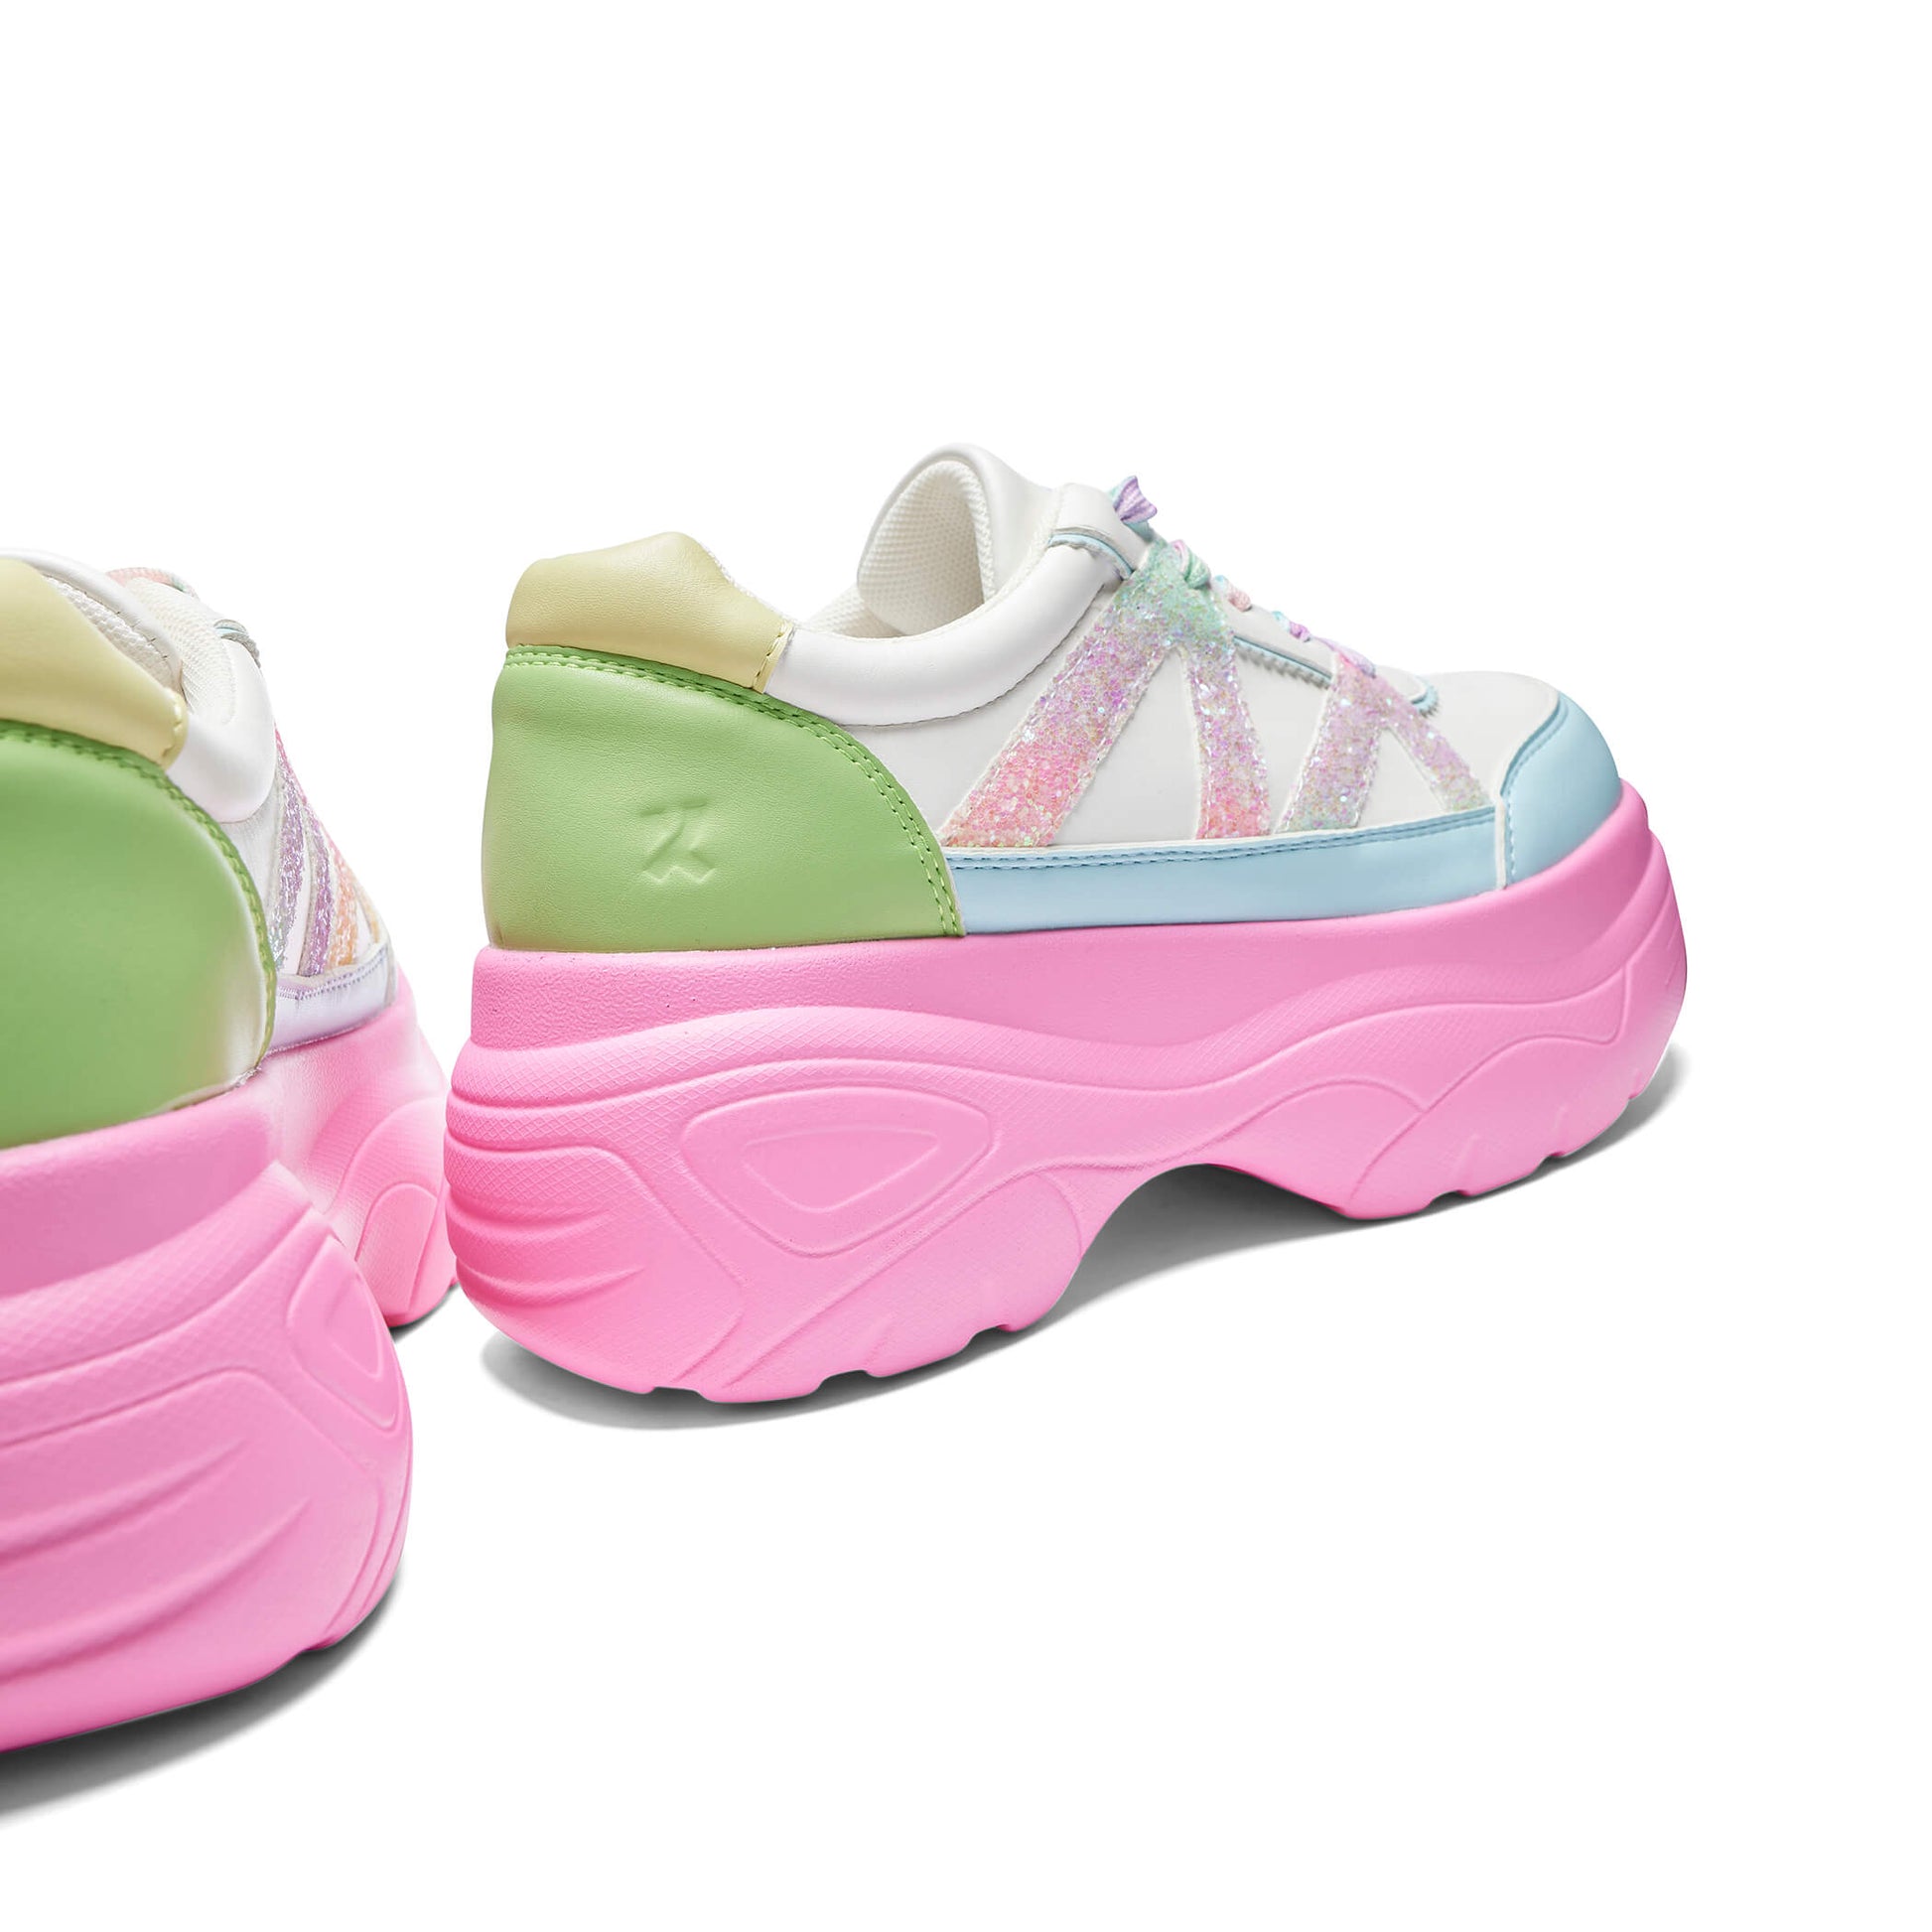 Gummy Glow Worm Chunky Trainers - Multi - KOI Footwear - Back and Side View